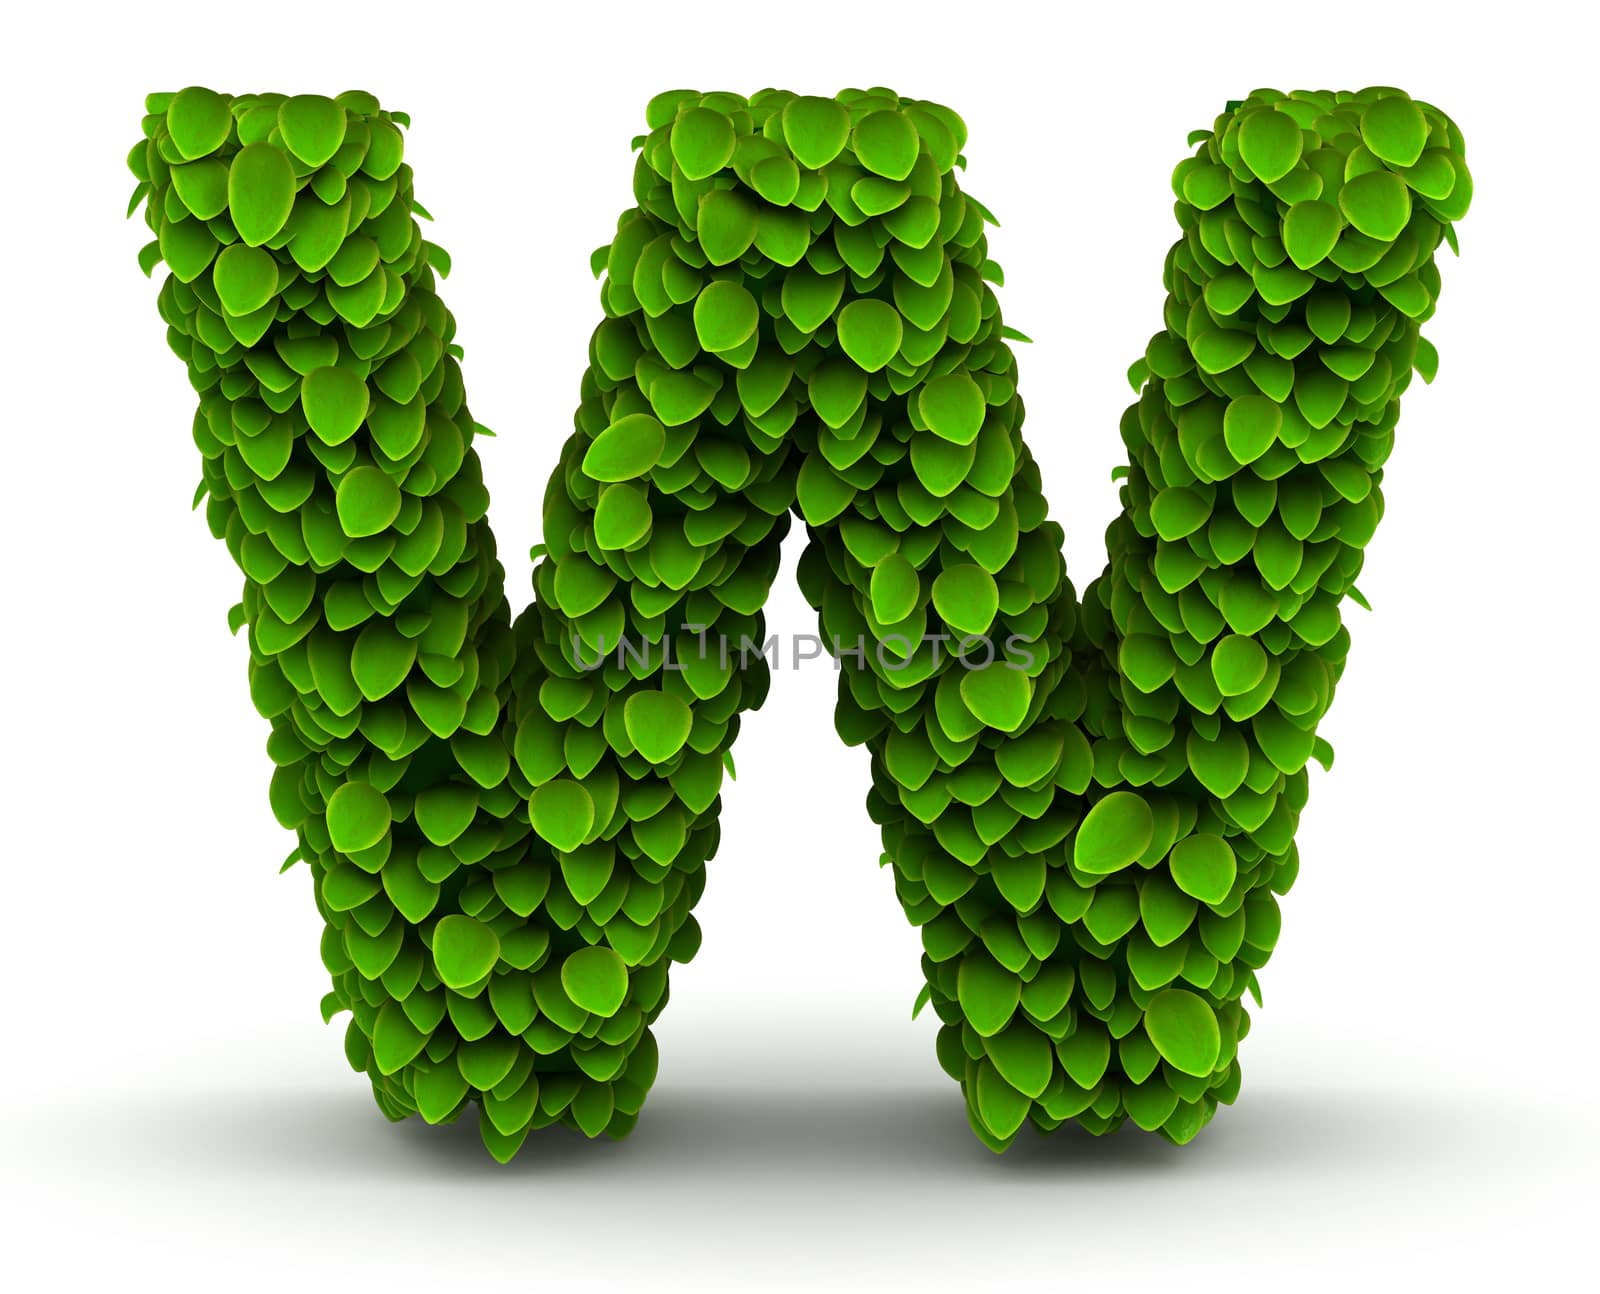 Leaves font letter W by iunewind